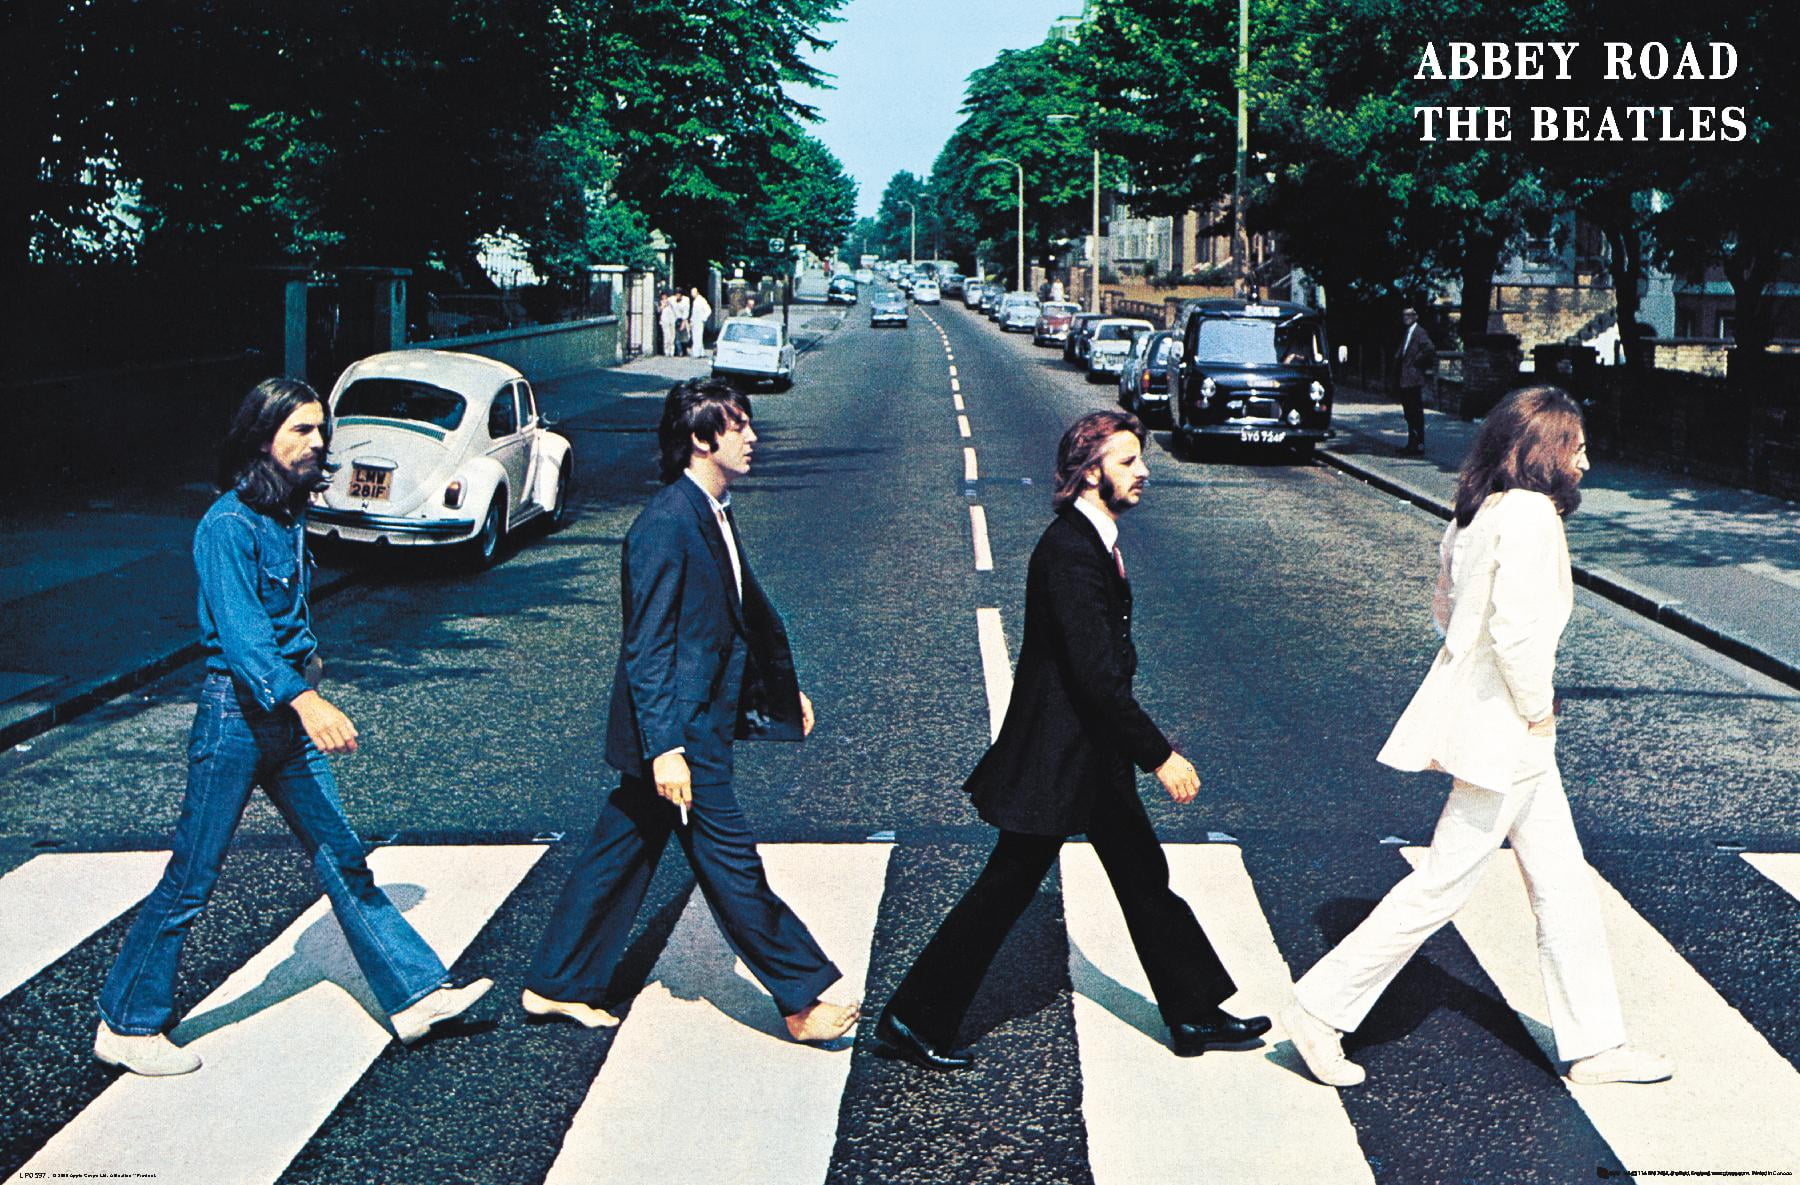 The Beatles - Abbey Road Wall Poster, 22.375 x 34 